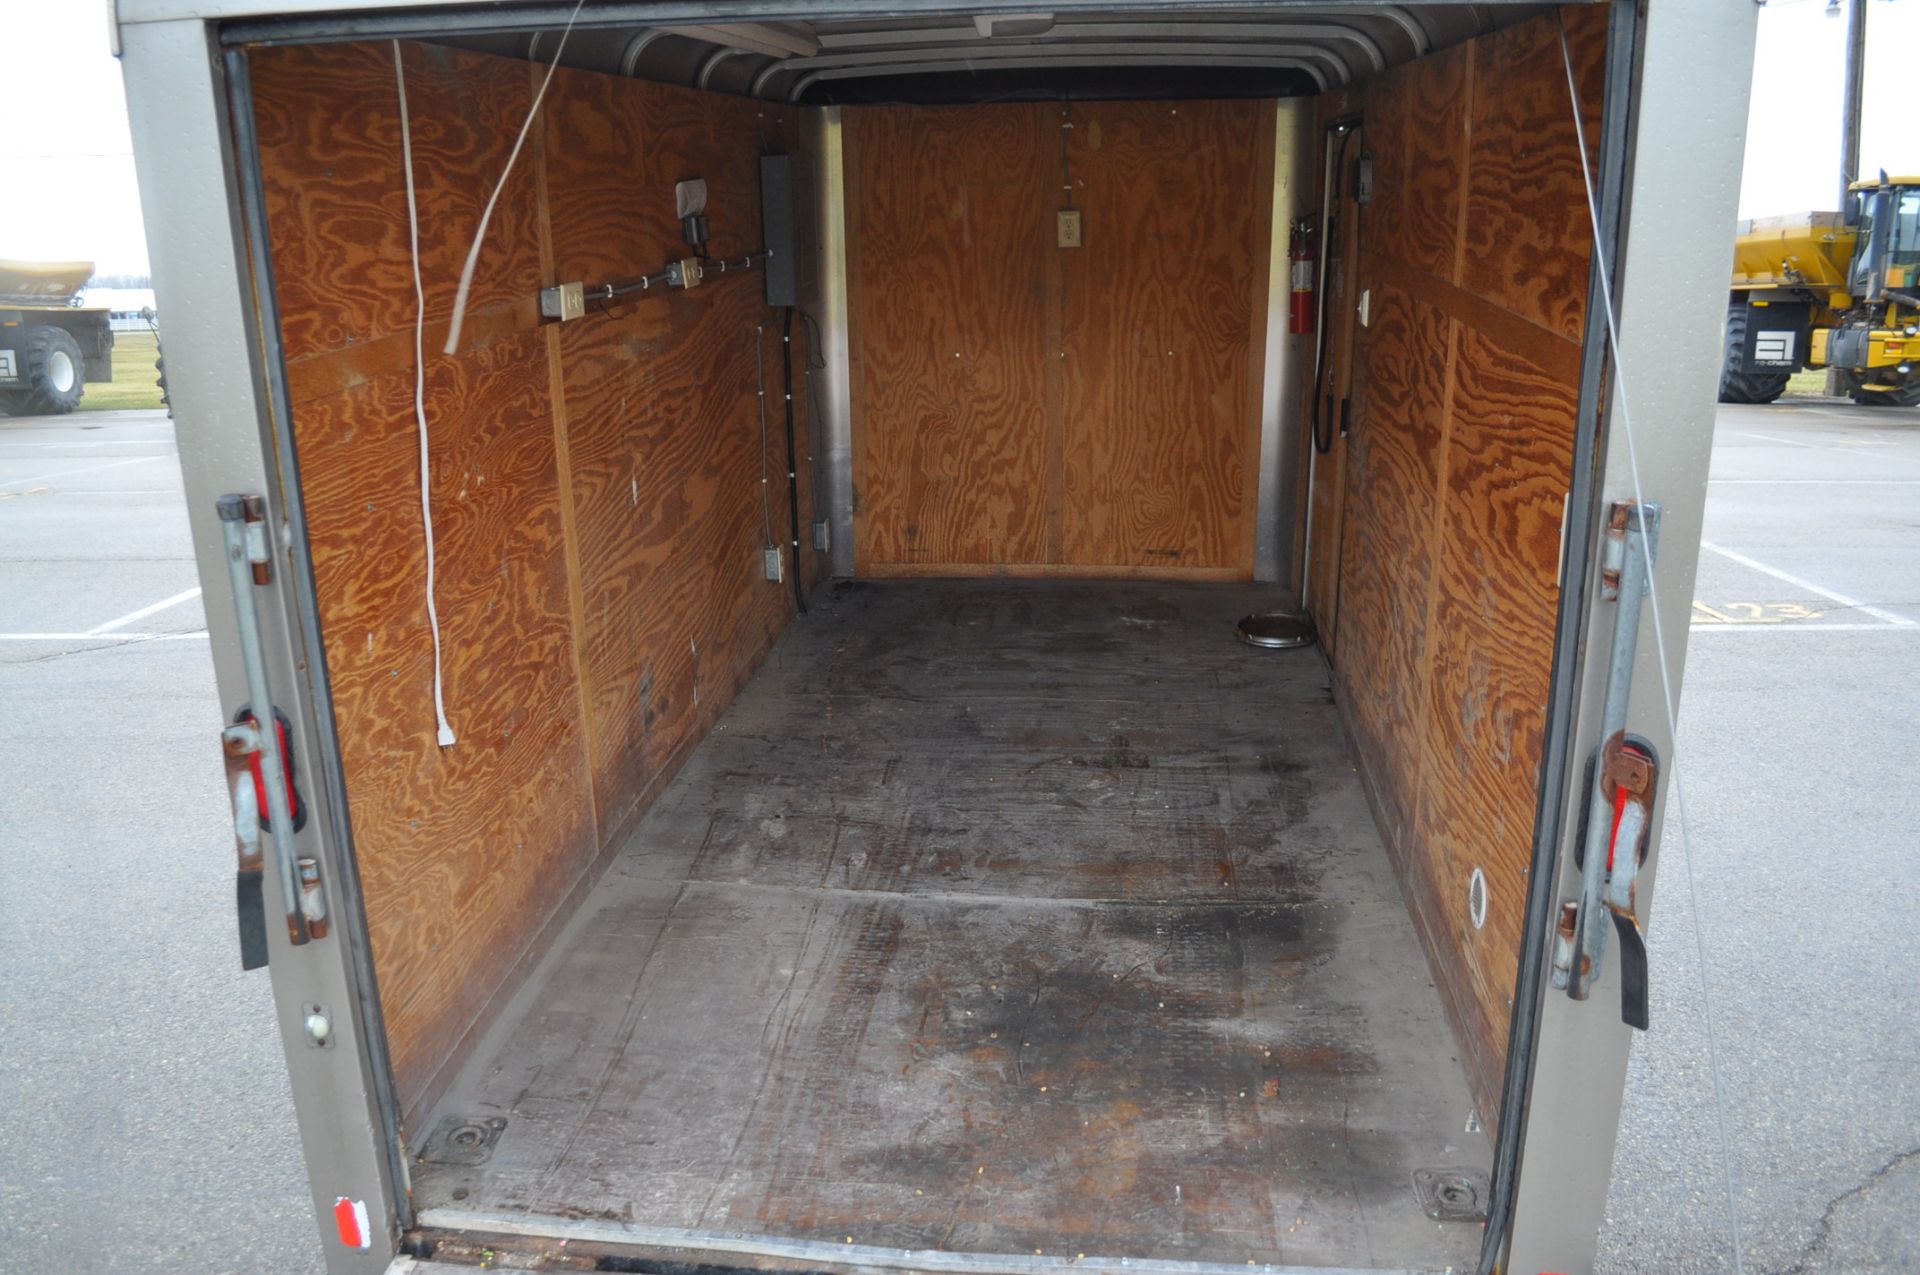 2005 Pace Cargo trailer - Image 7 of 7